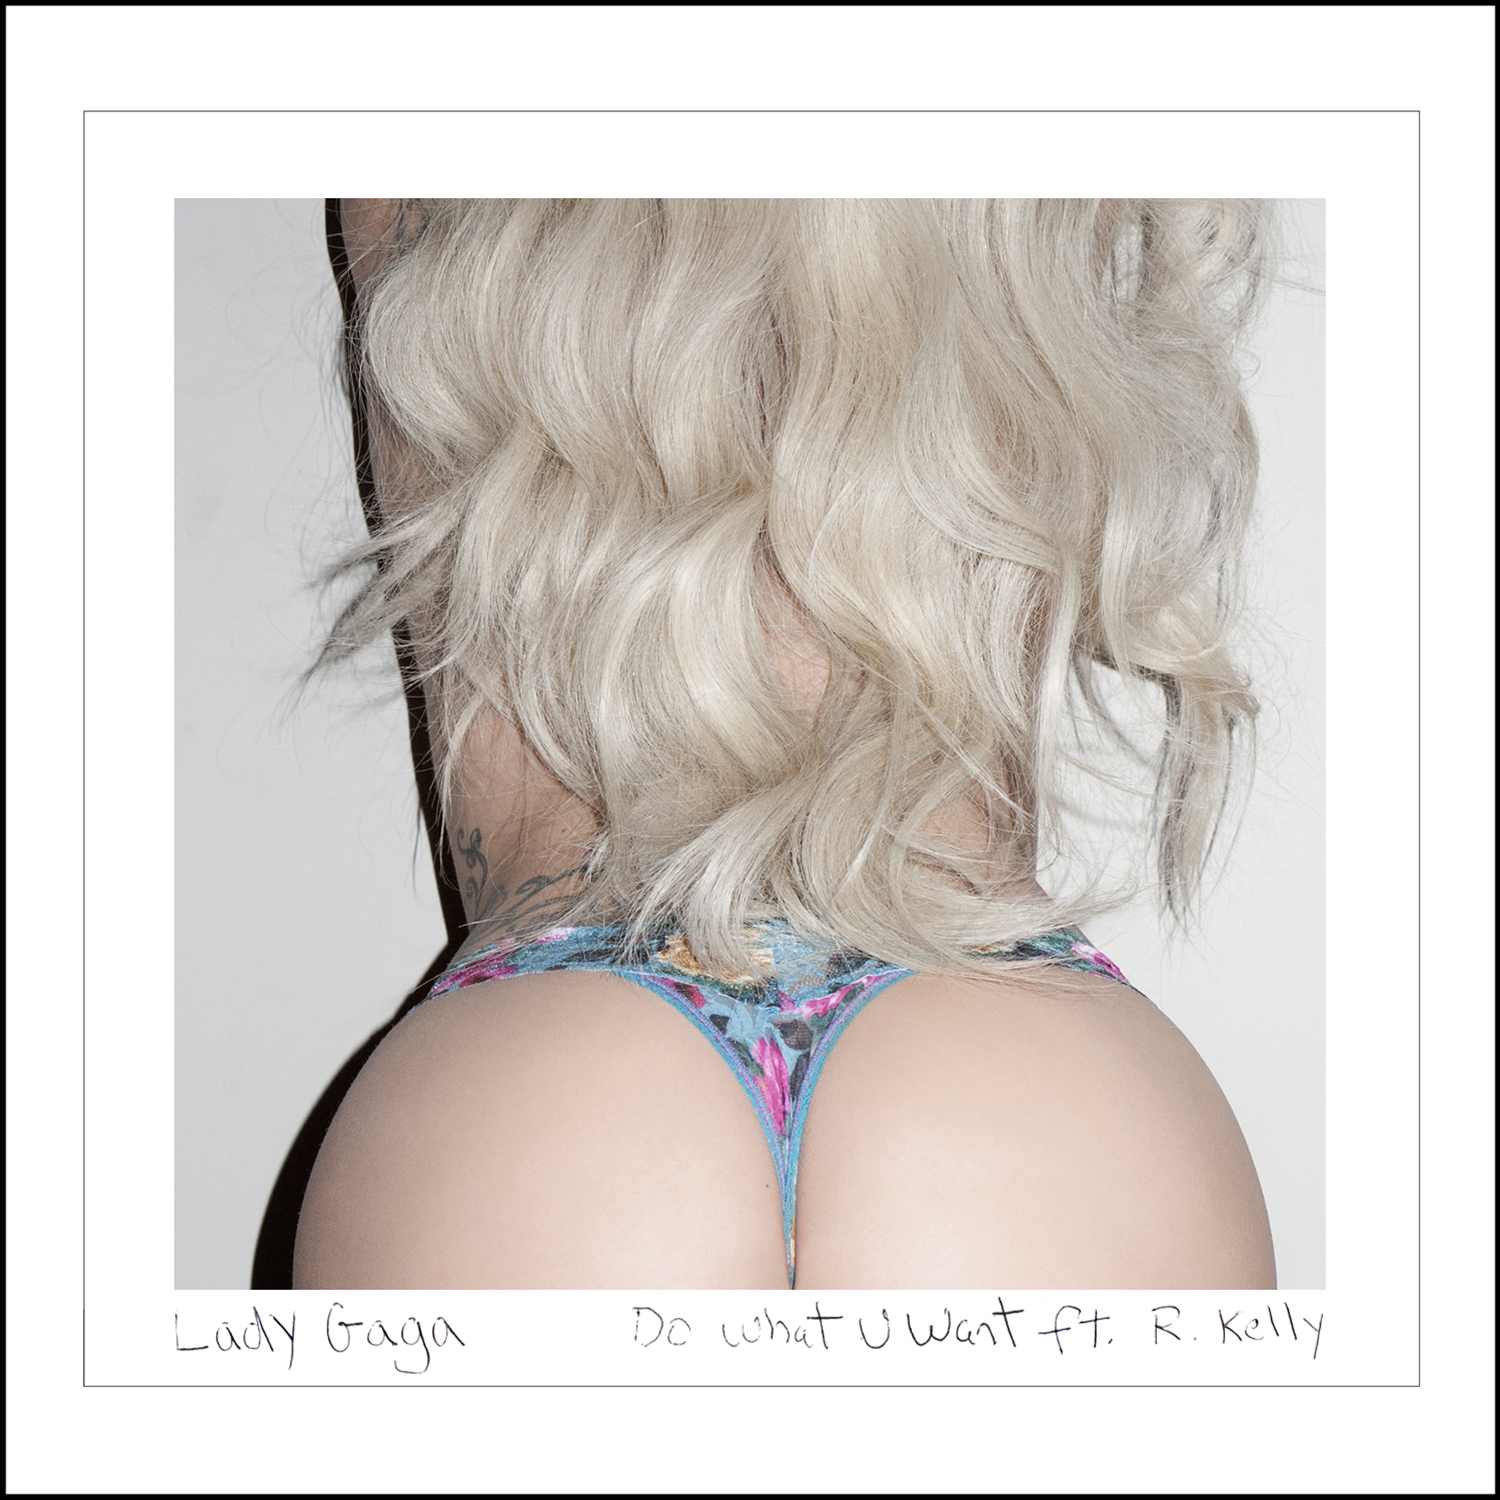 Lady Gaga – Do What You Want ft. R. Kelly